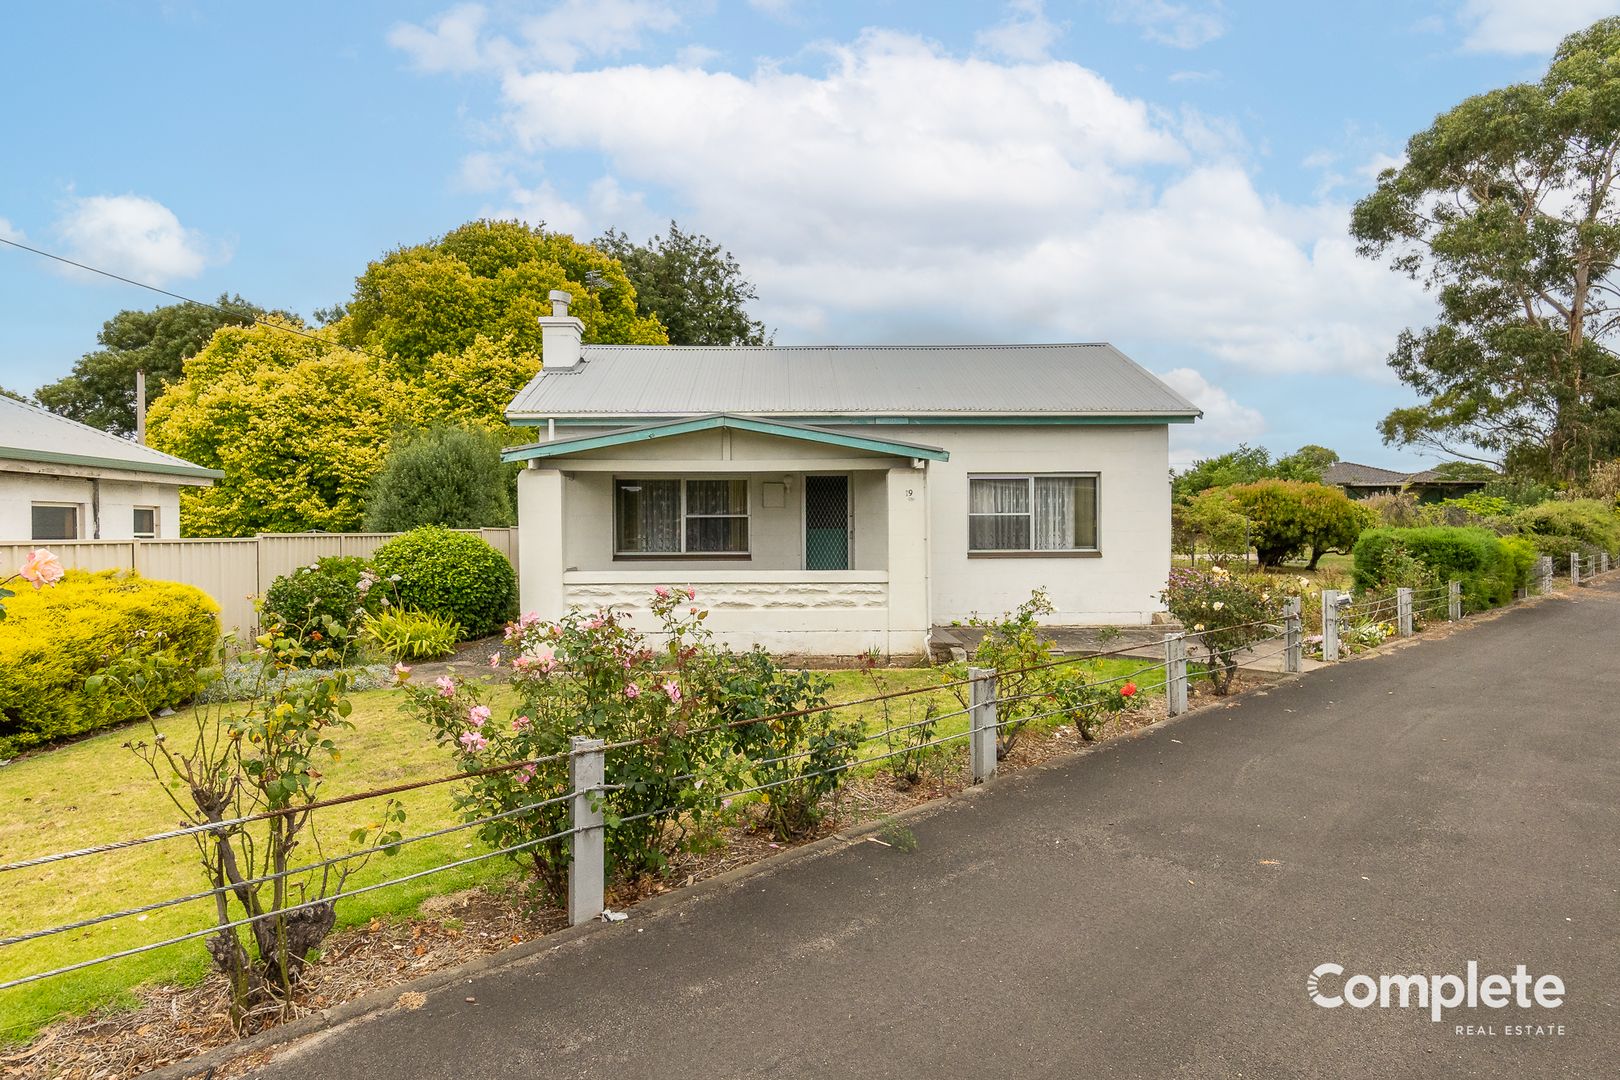 19 Crouch Street North, Mount Gambier SA 5290